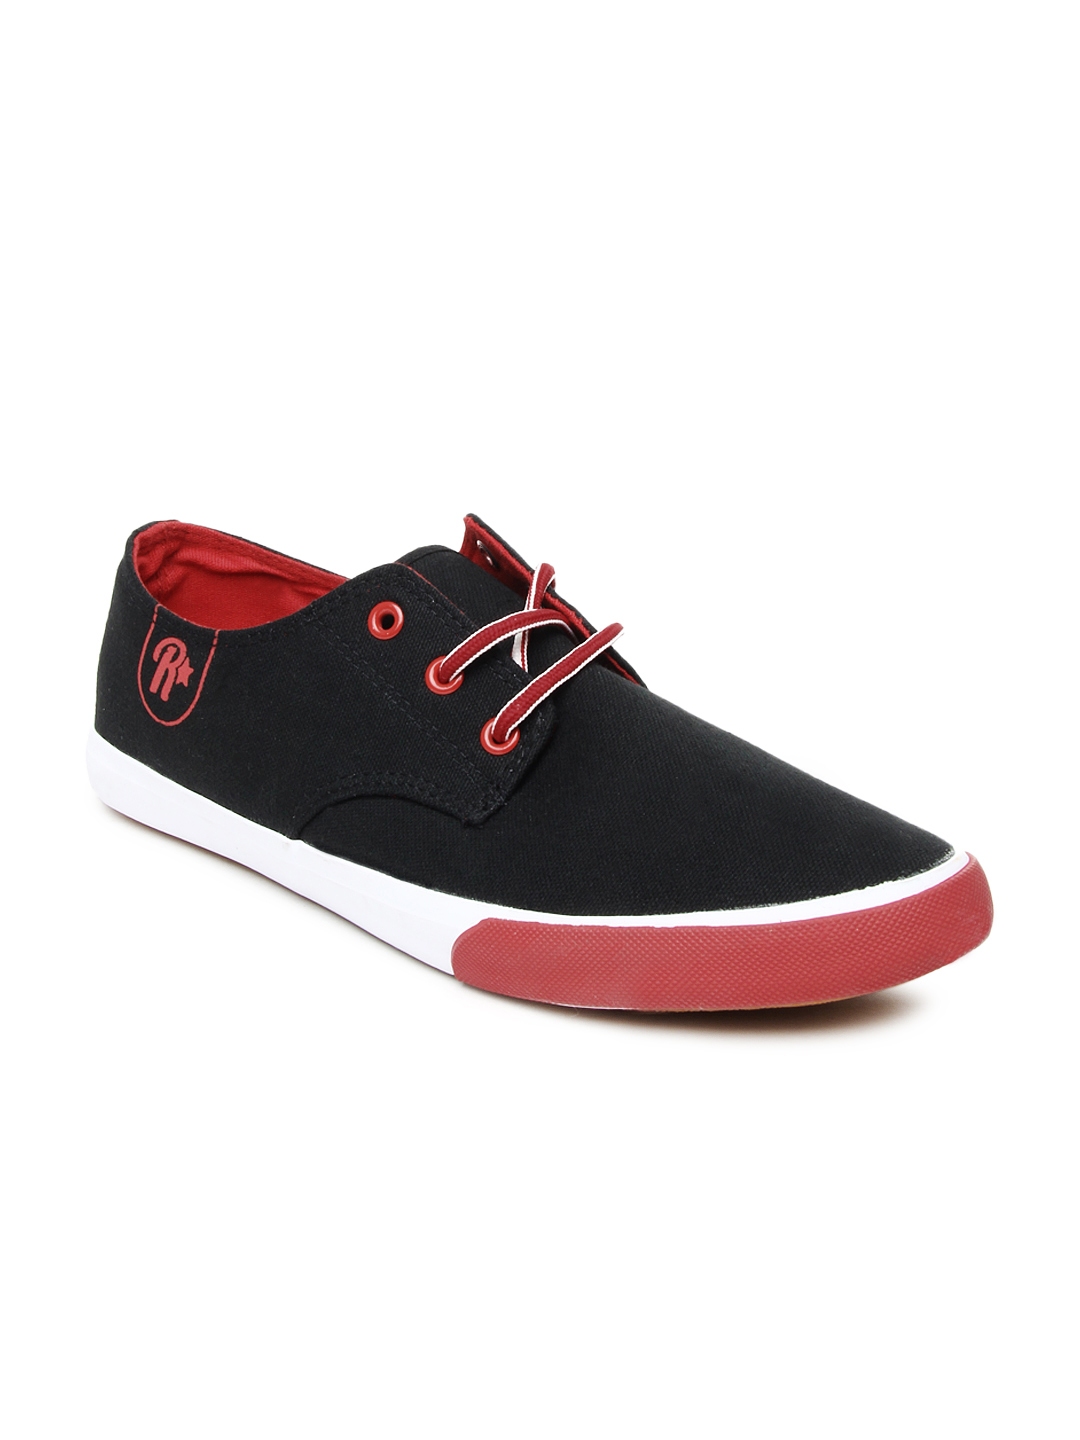 Buy Roadster Men Black Casual Shoes - Casual Shoes for Men 111501 | Myntra